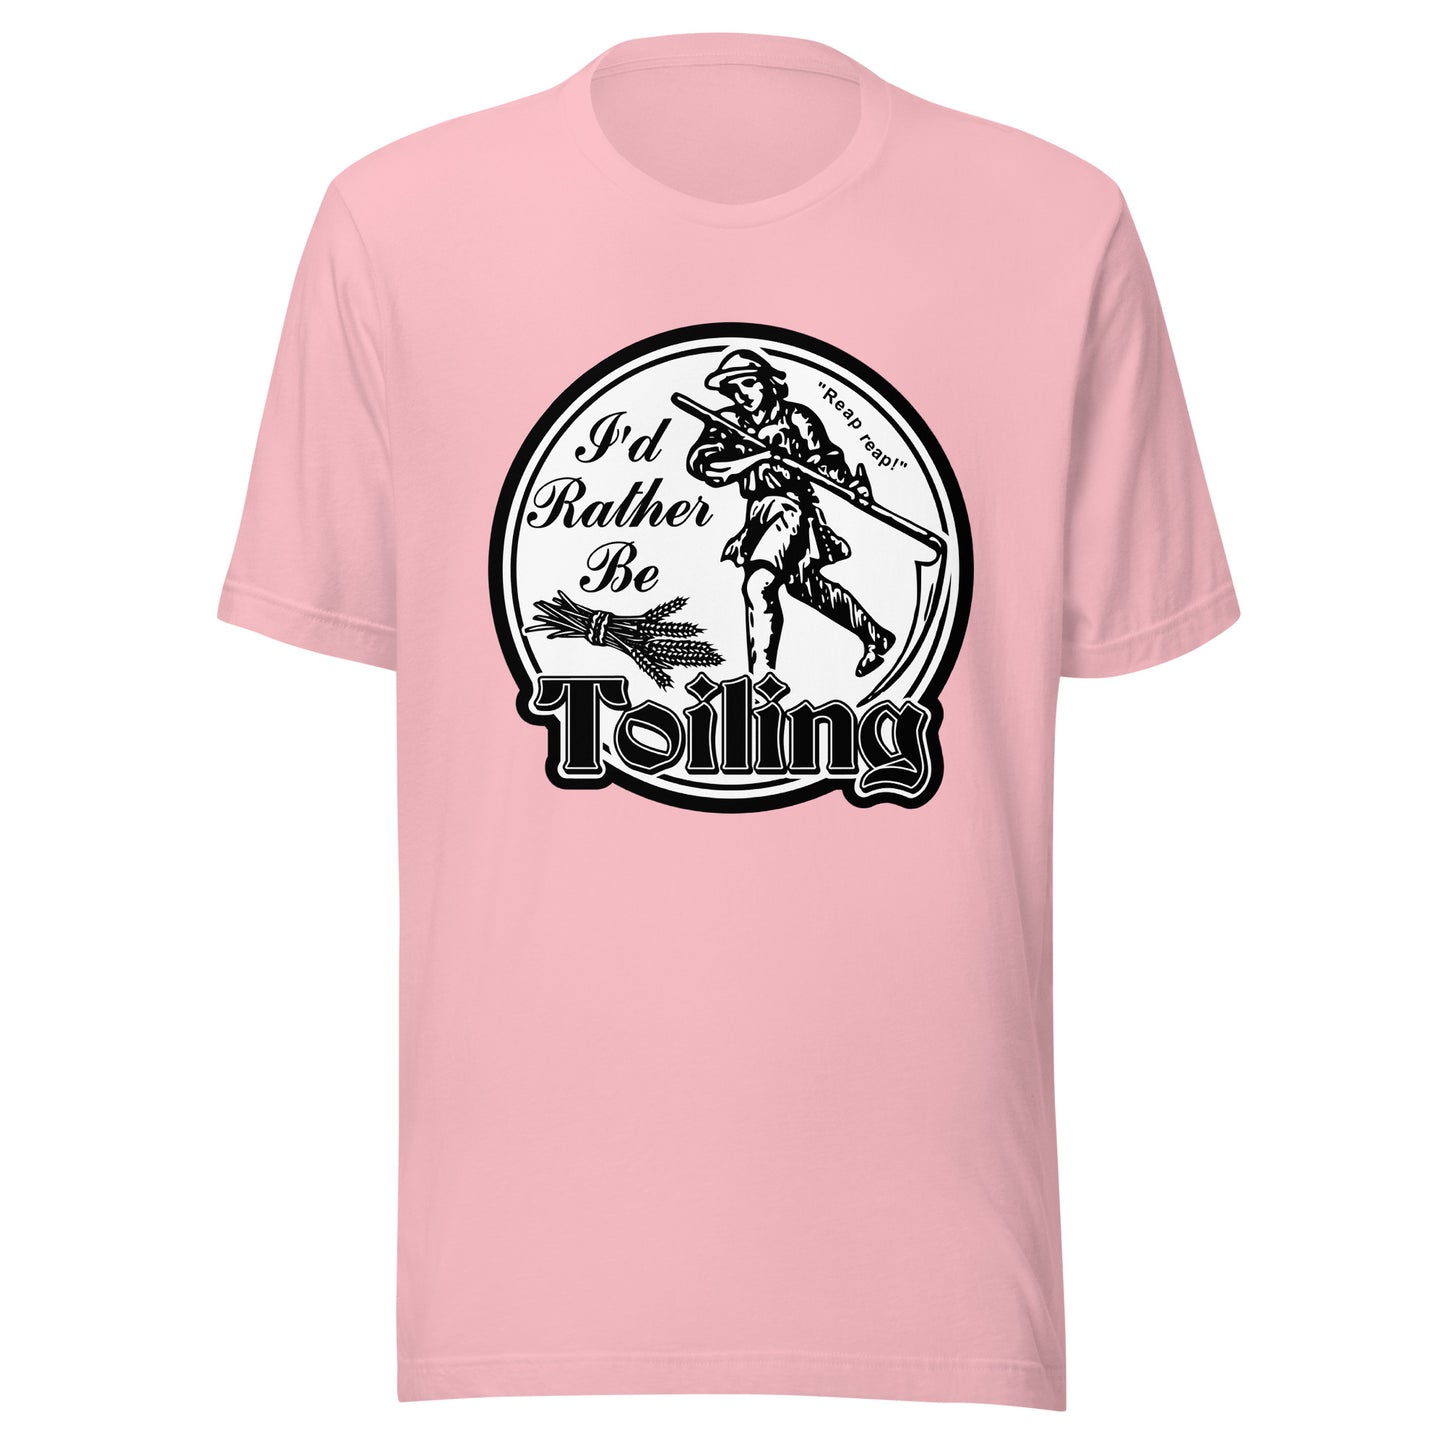 "I'd Rather Be Toiling" Unisex t-shirt